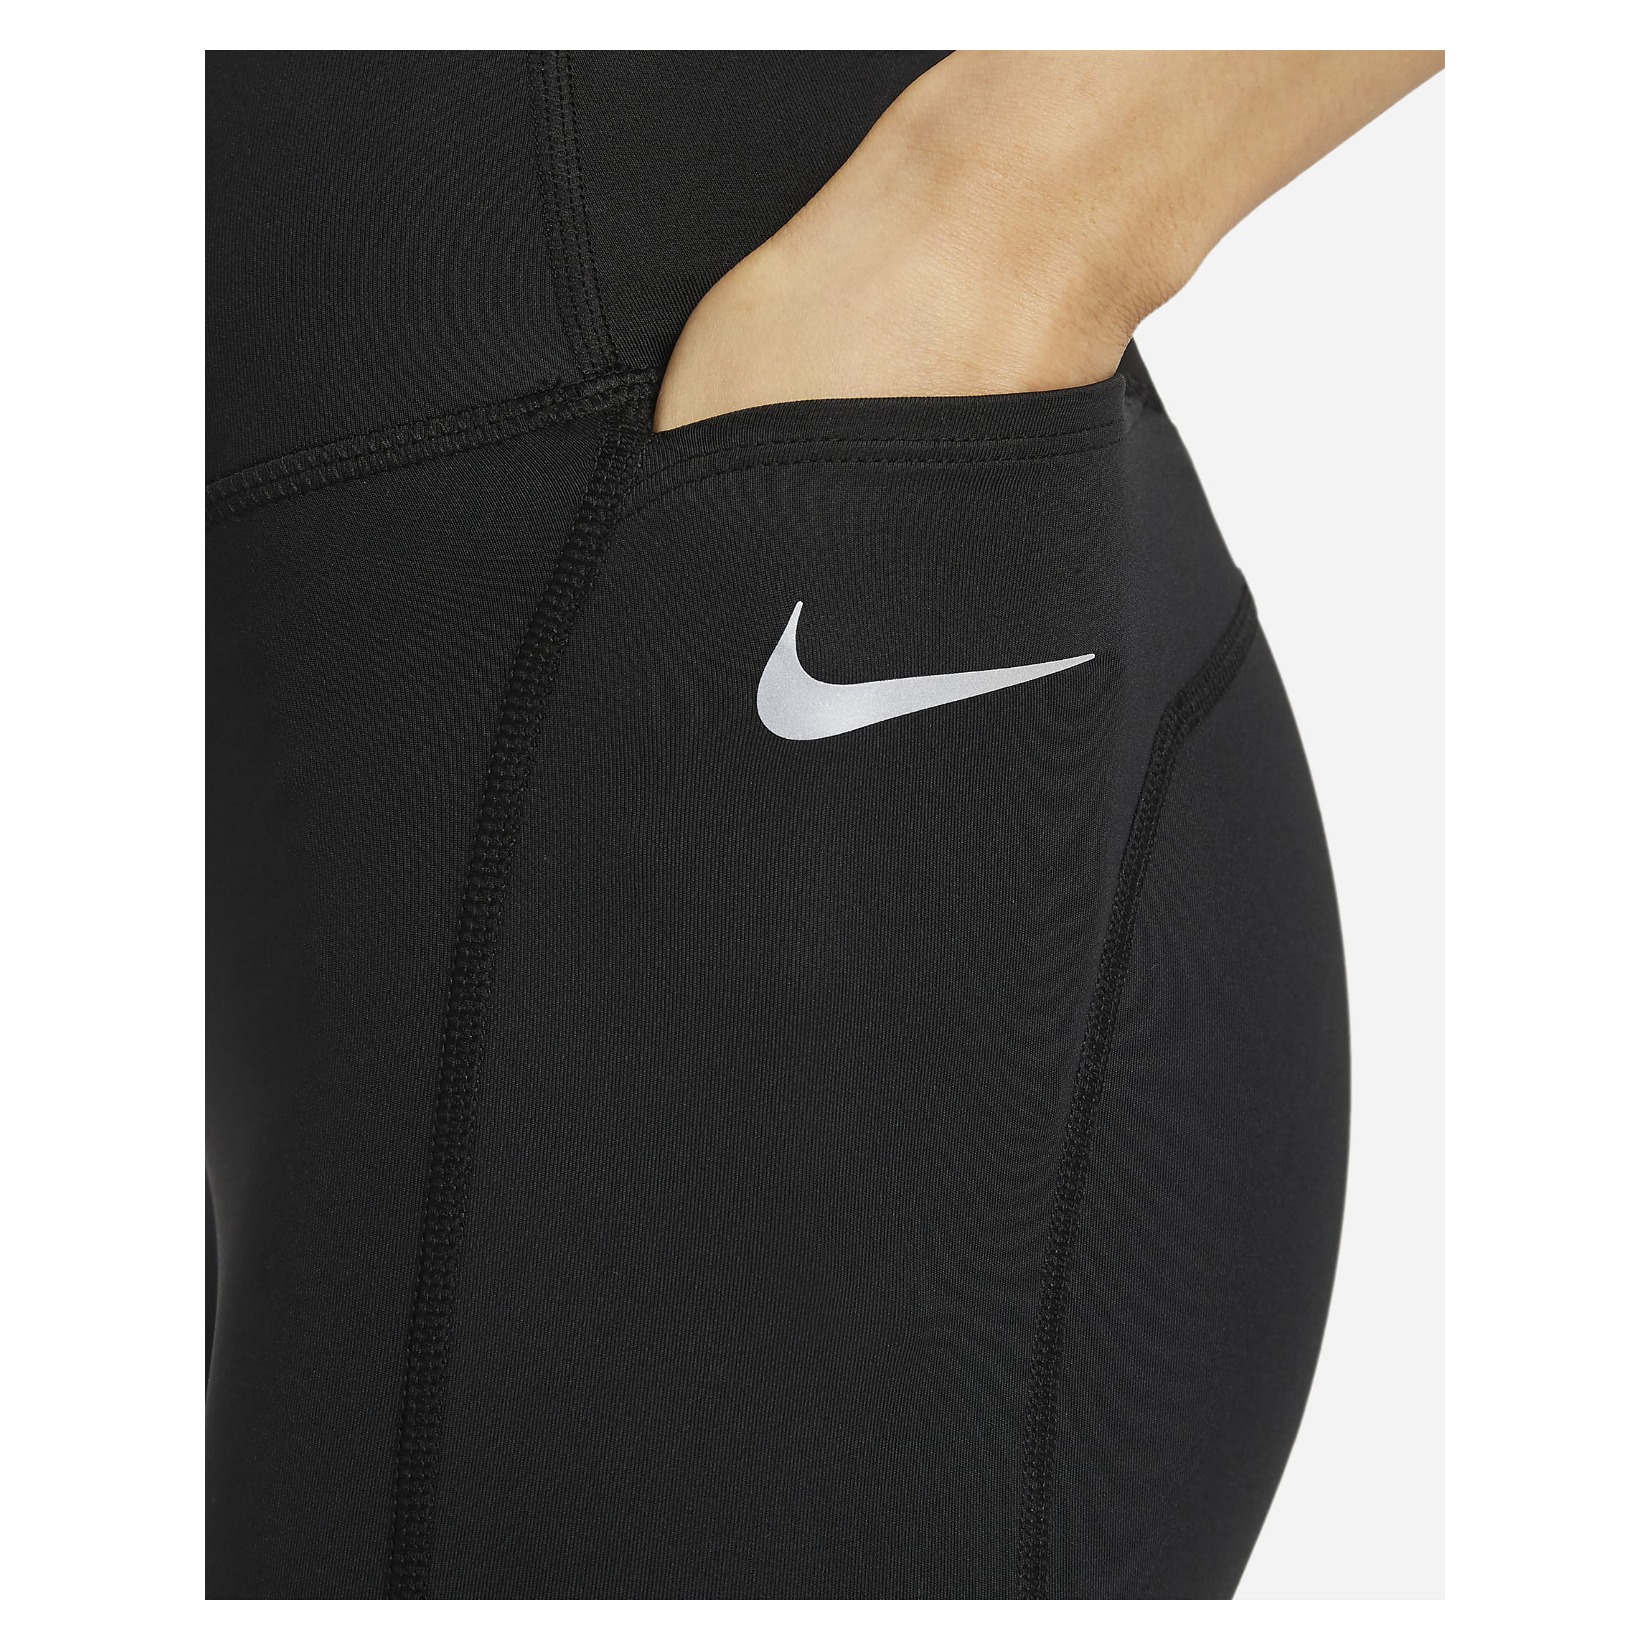 Nike Epic Fast Women's Mid-Rise Running Tights - Black/Reflective